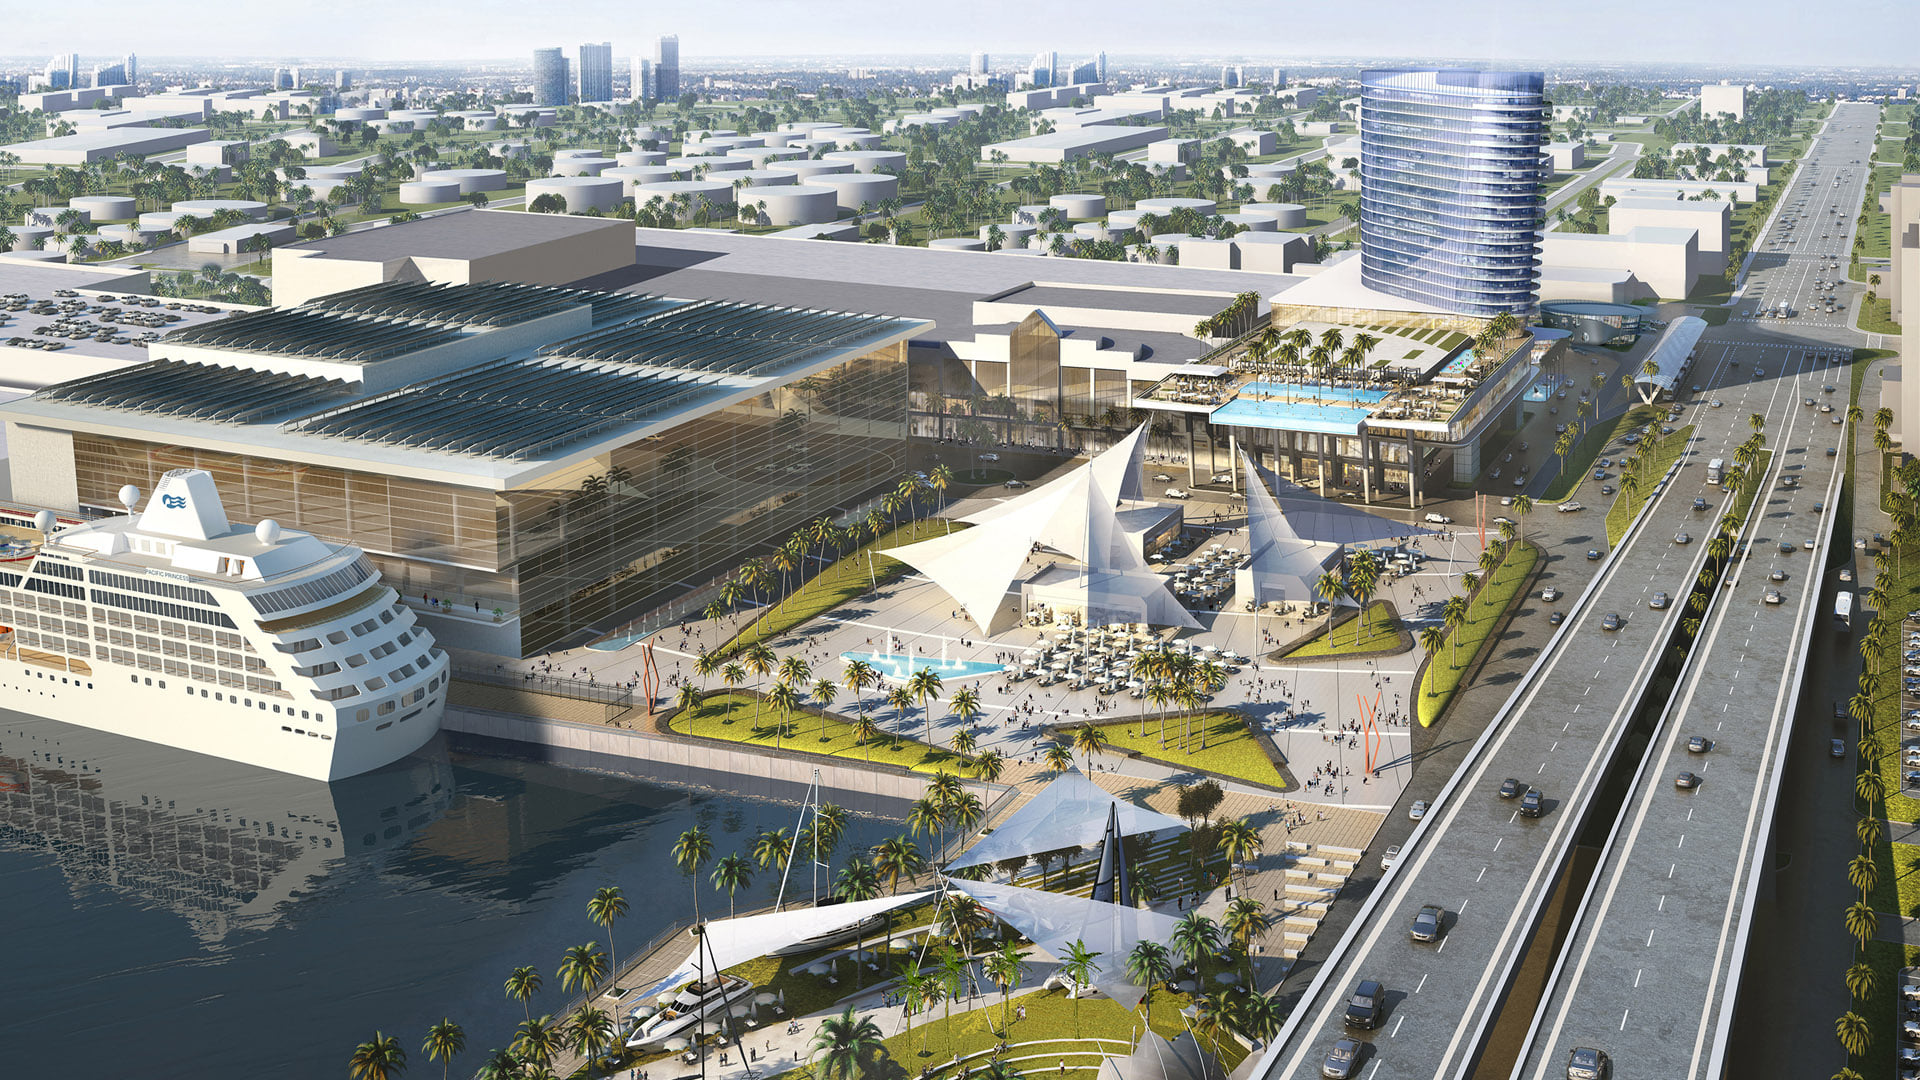 Bermuda Landscape Awarded Broward County Convention Center Project